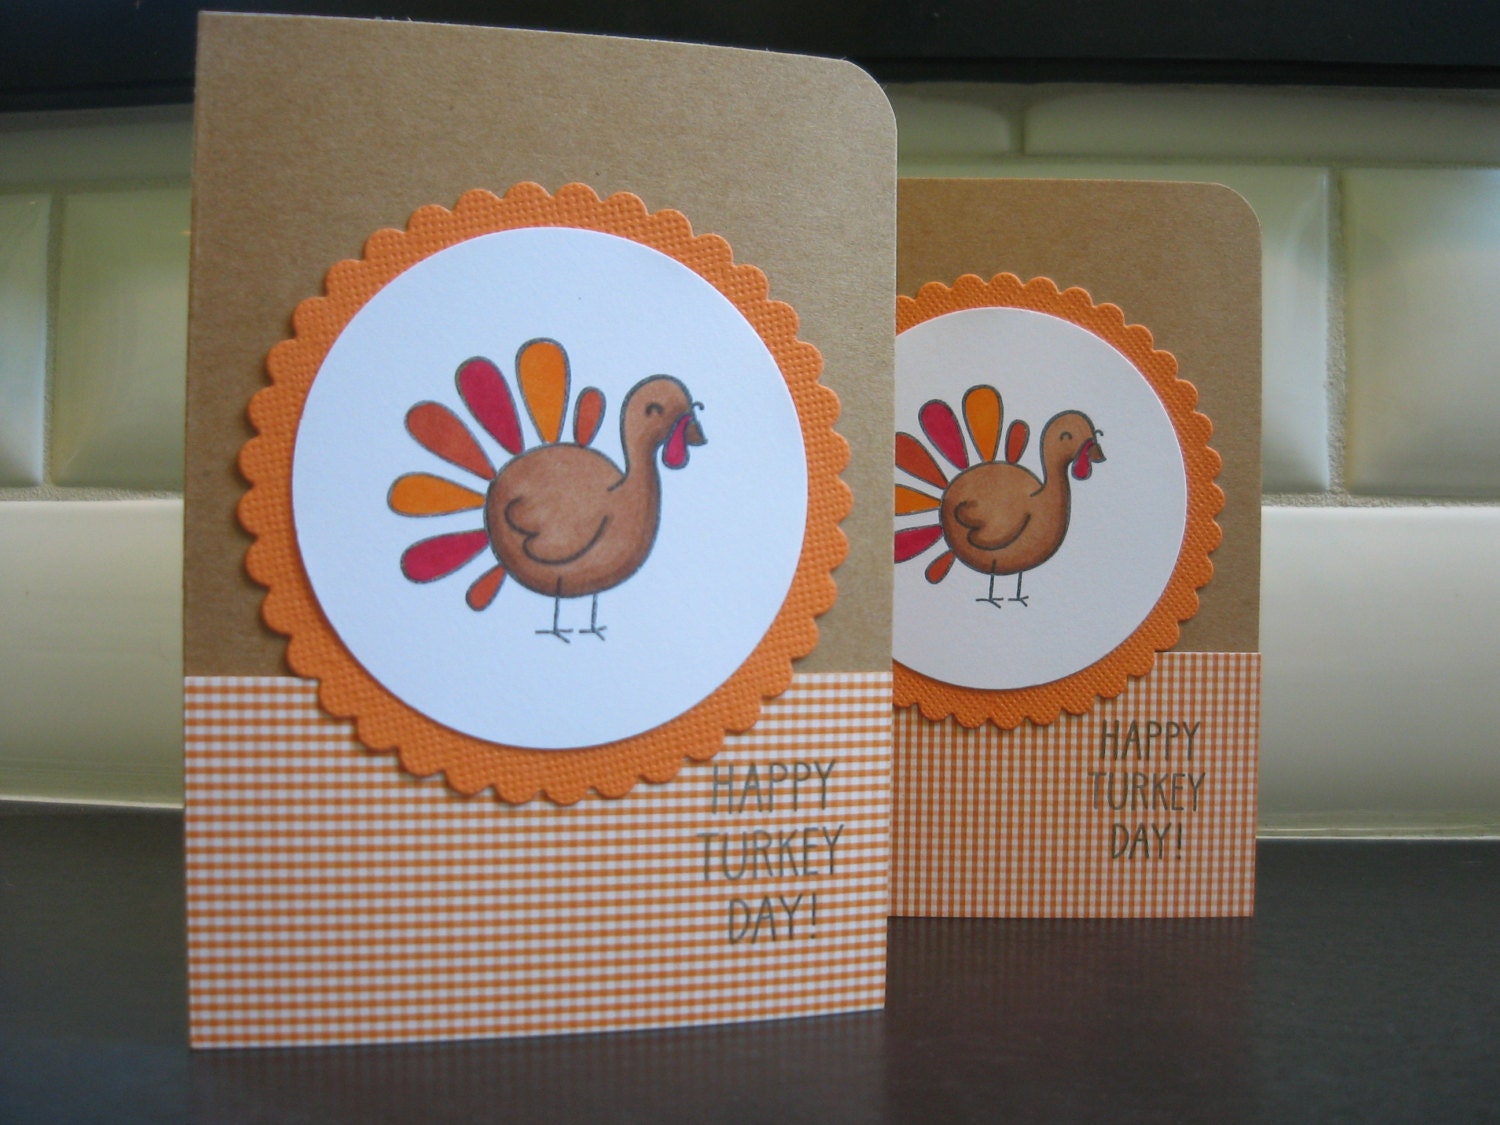 Thanksgiving Cards Set of 2, Turkey Day Cards - apaperaffaire